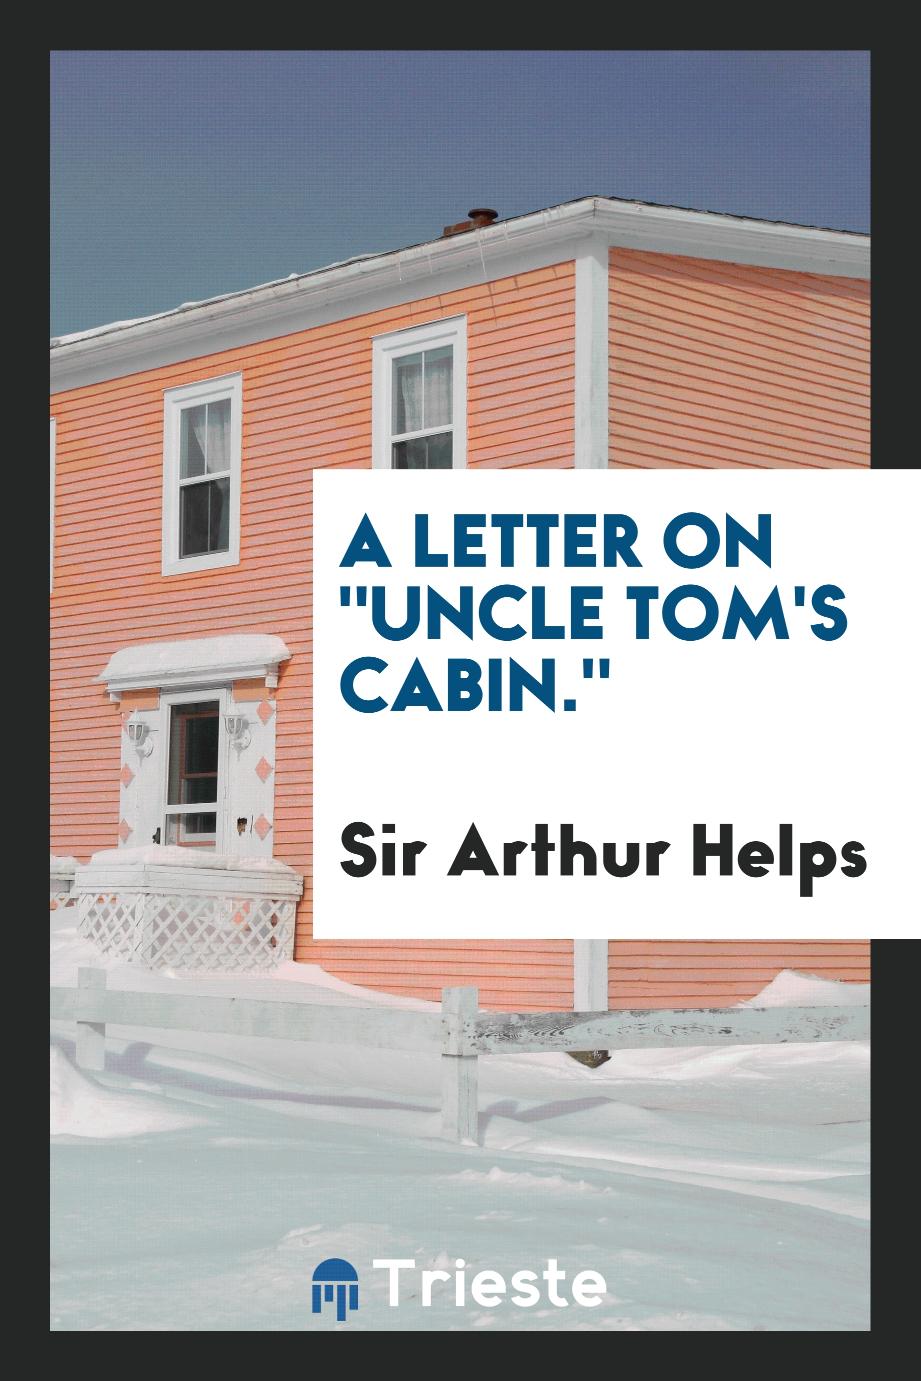 A letter on "Uncle Tom's cabin."